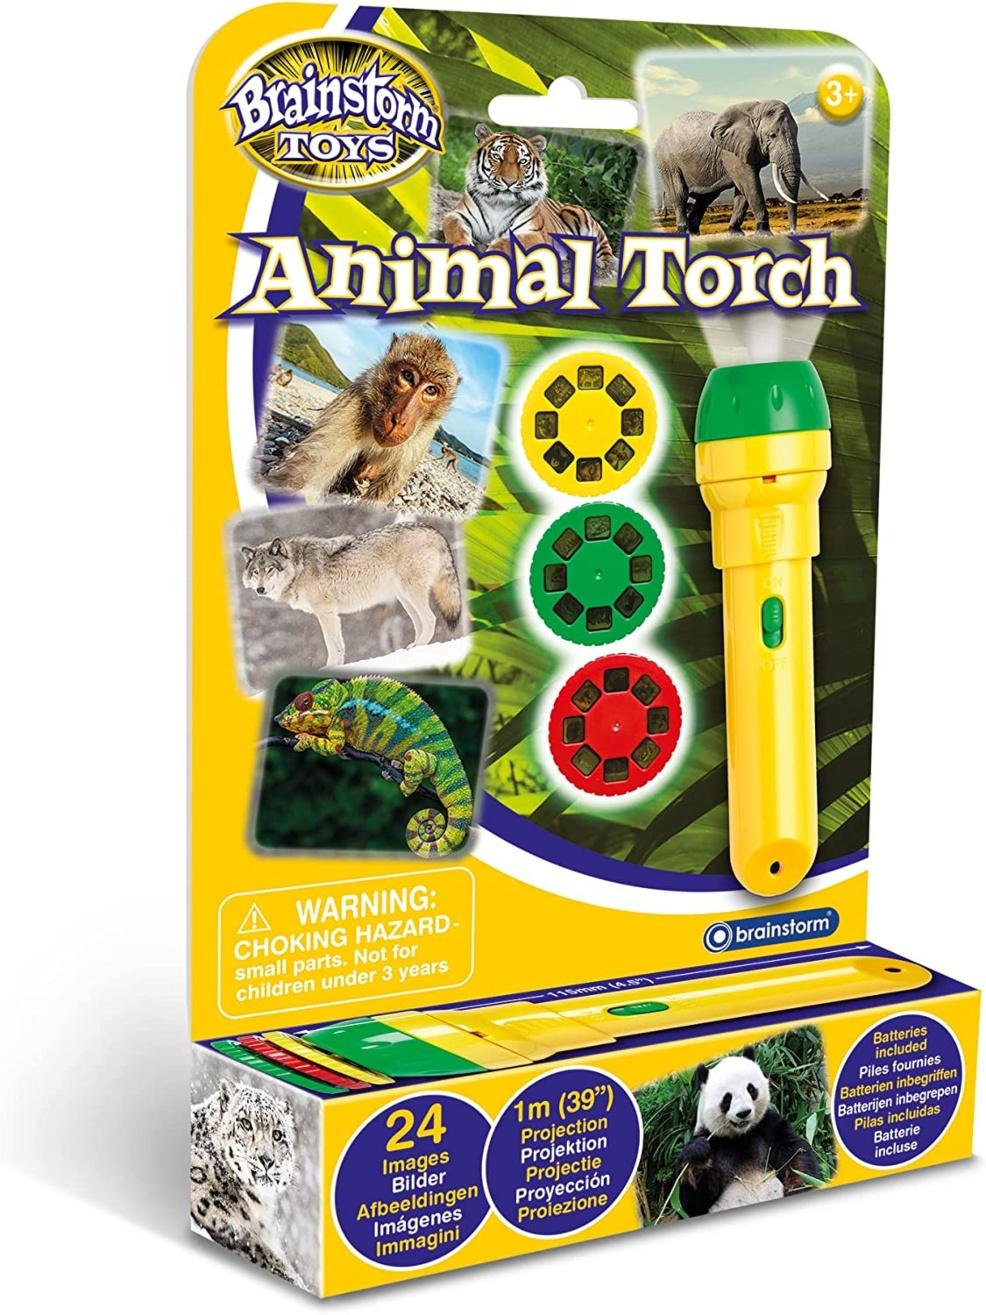 picture of Animal projector torch